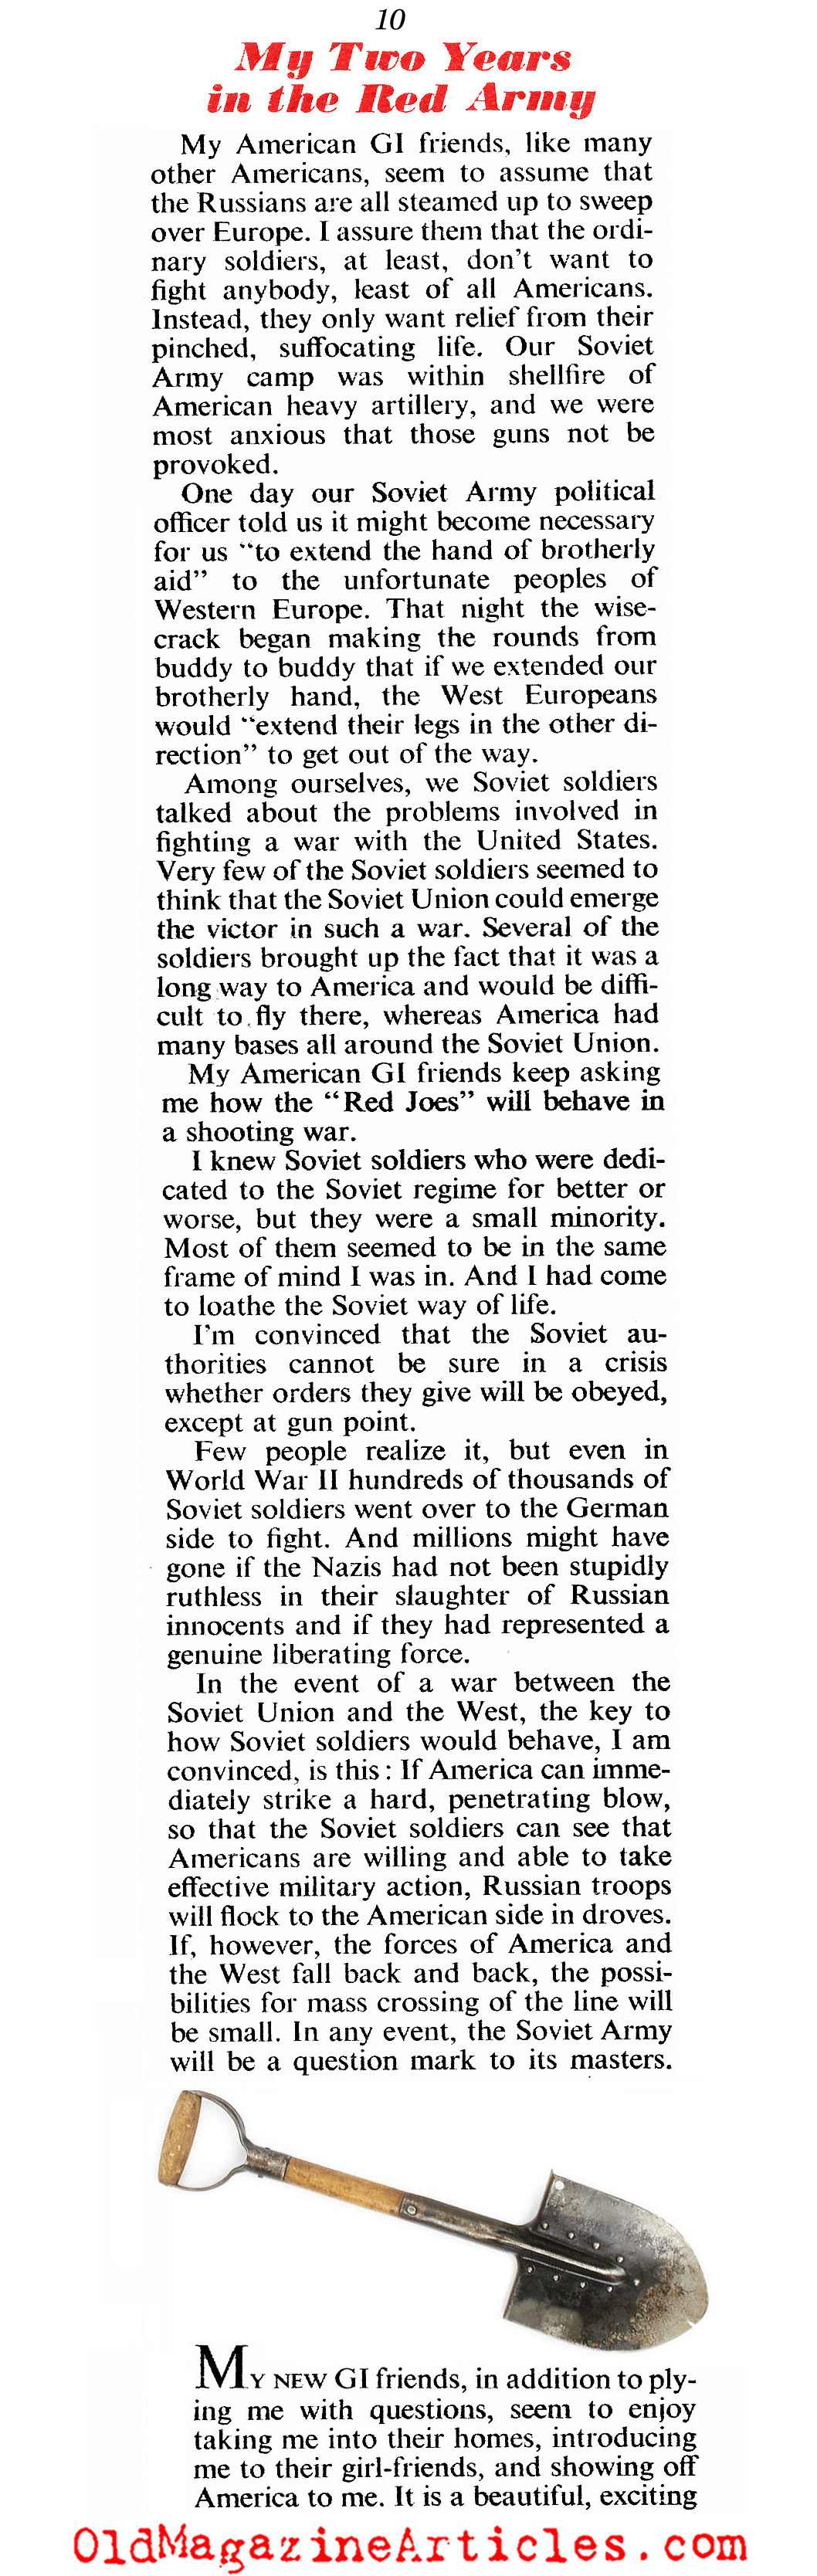 ''My Two Years In The Red Army'' (American Magazine, 1953)